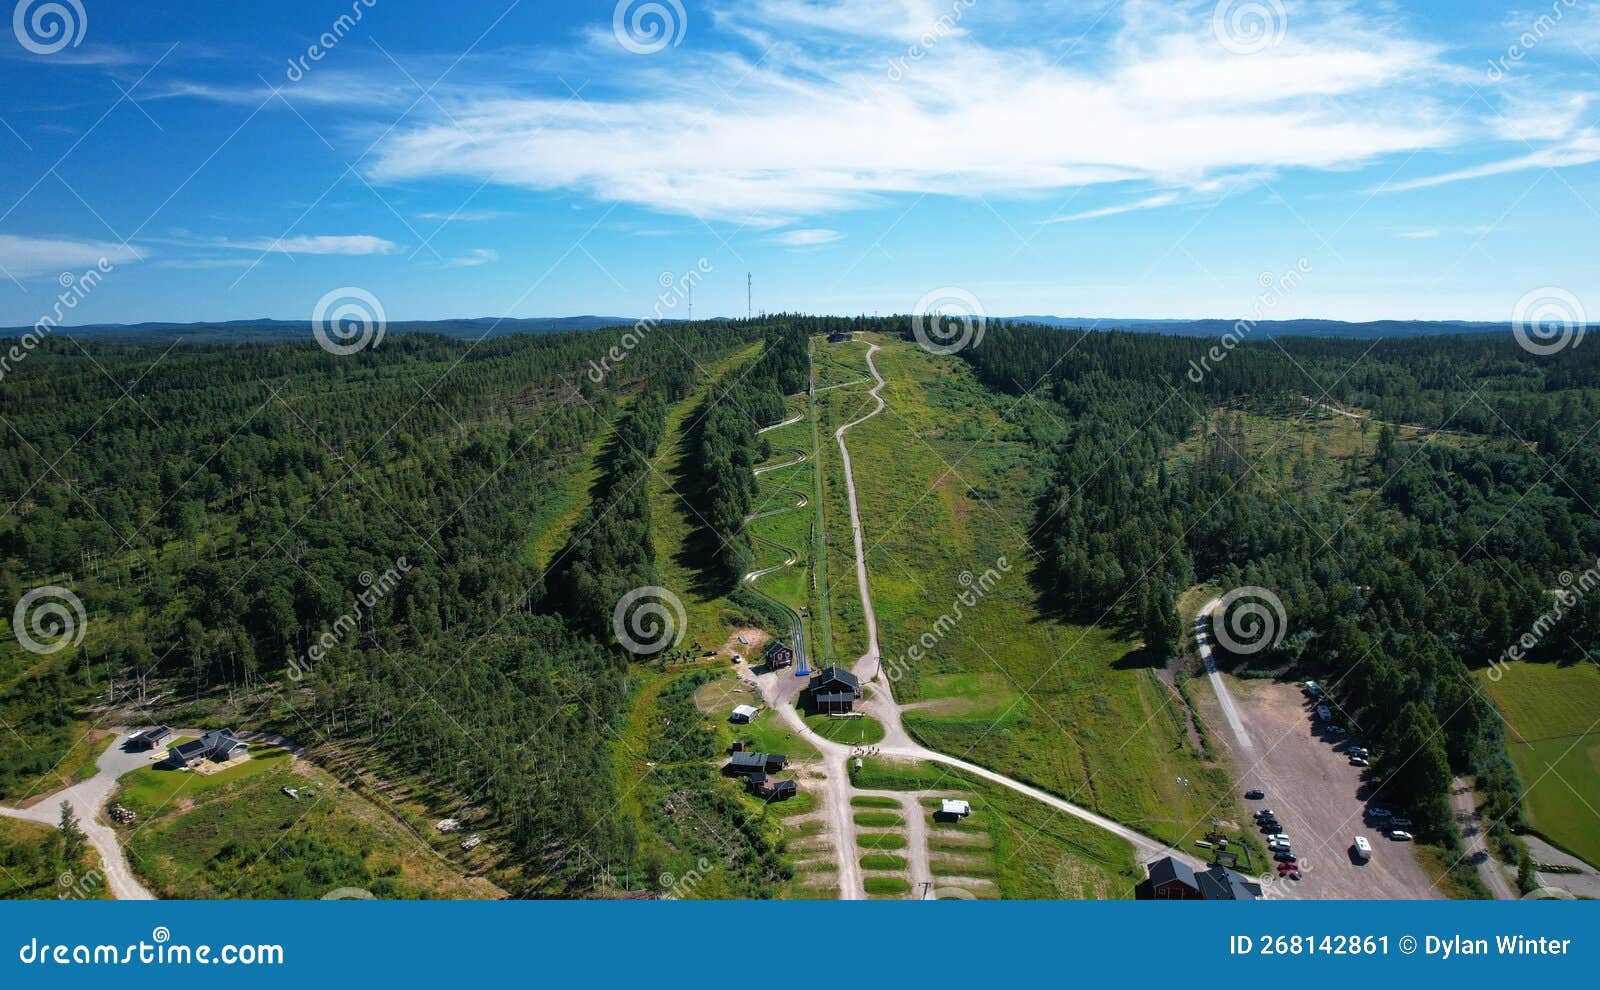 high angle view of a bobsled roller coaster toboggan run in summer rattvik sweden.